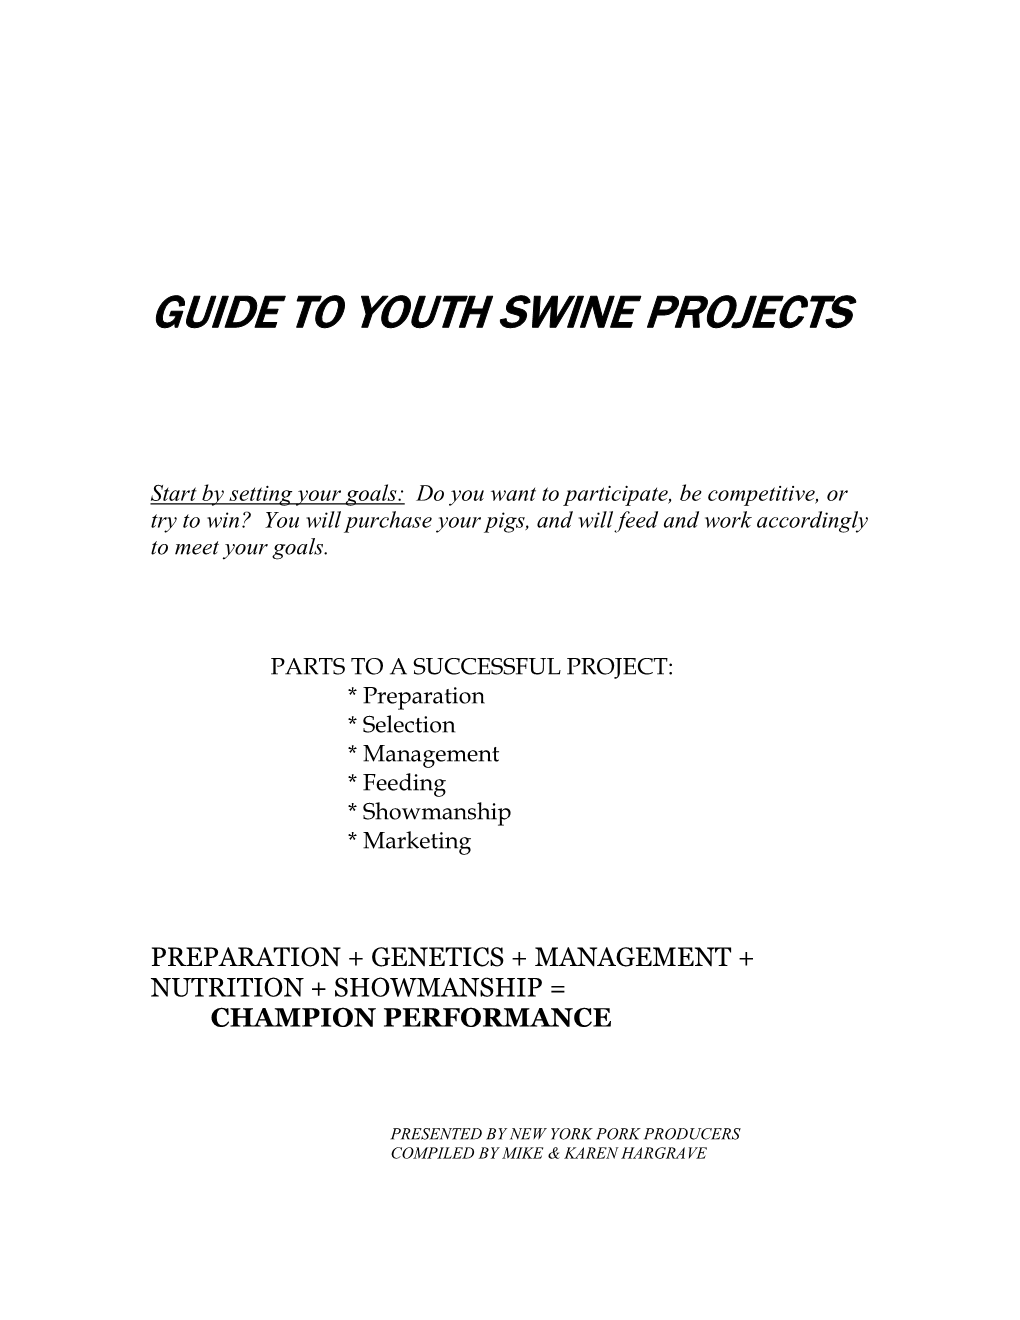 Guide to Youth Swine Projects